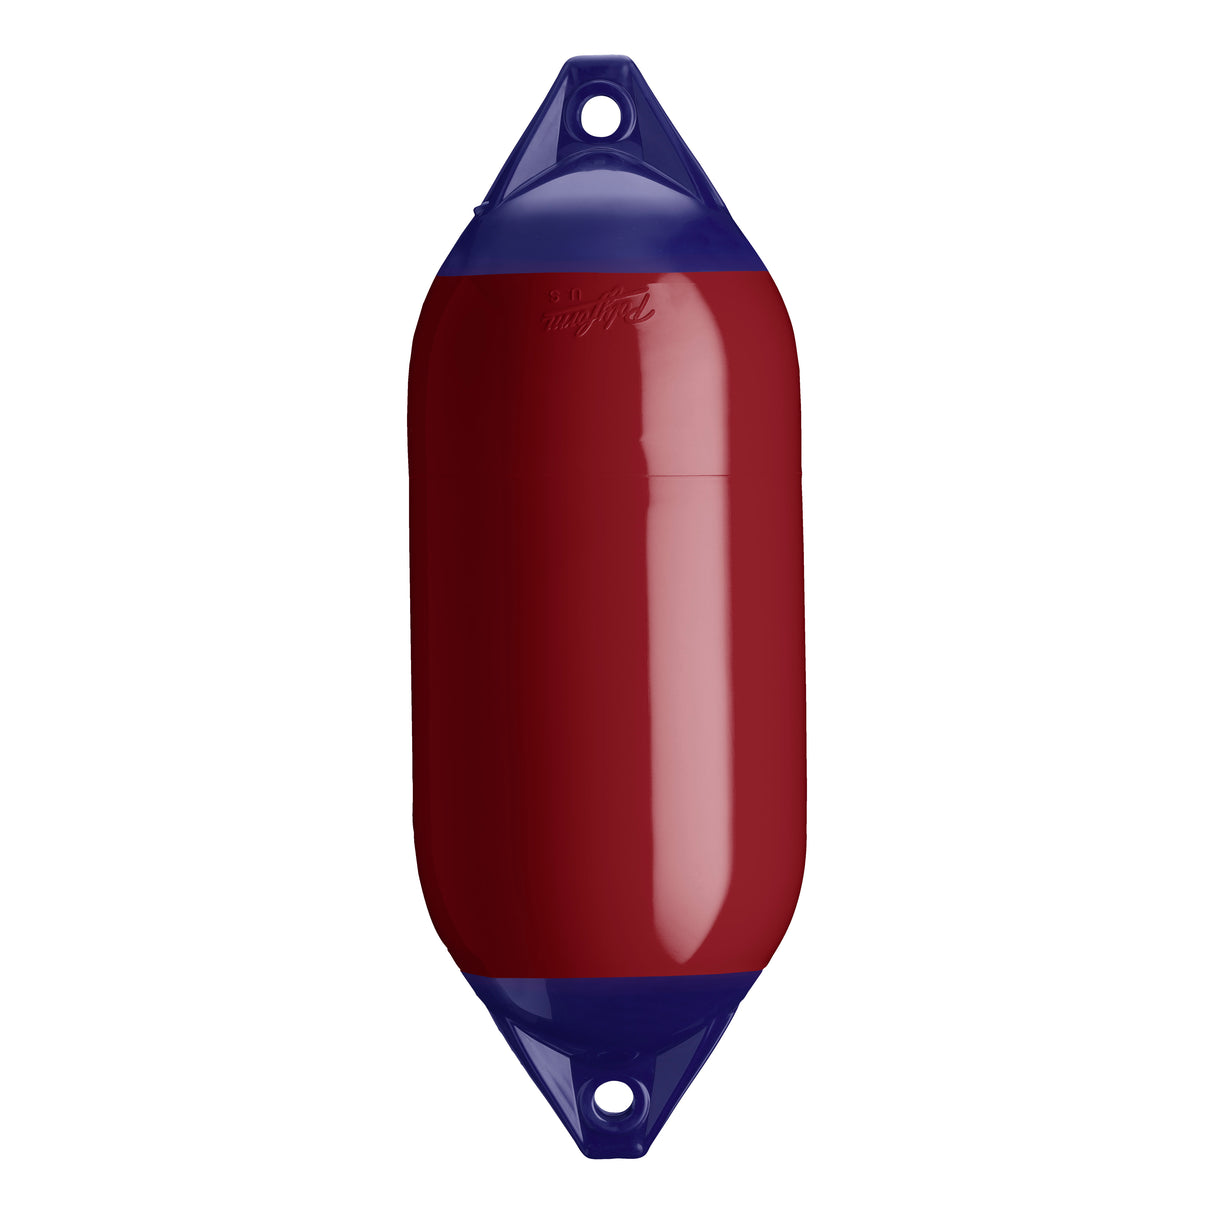 Burgundy boat fender with Navy-Top, Polyform F-5 